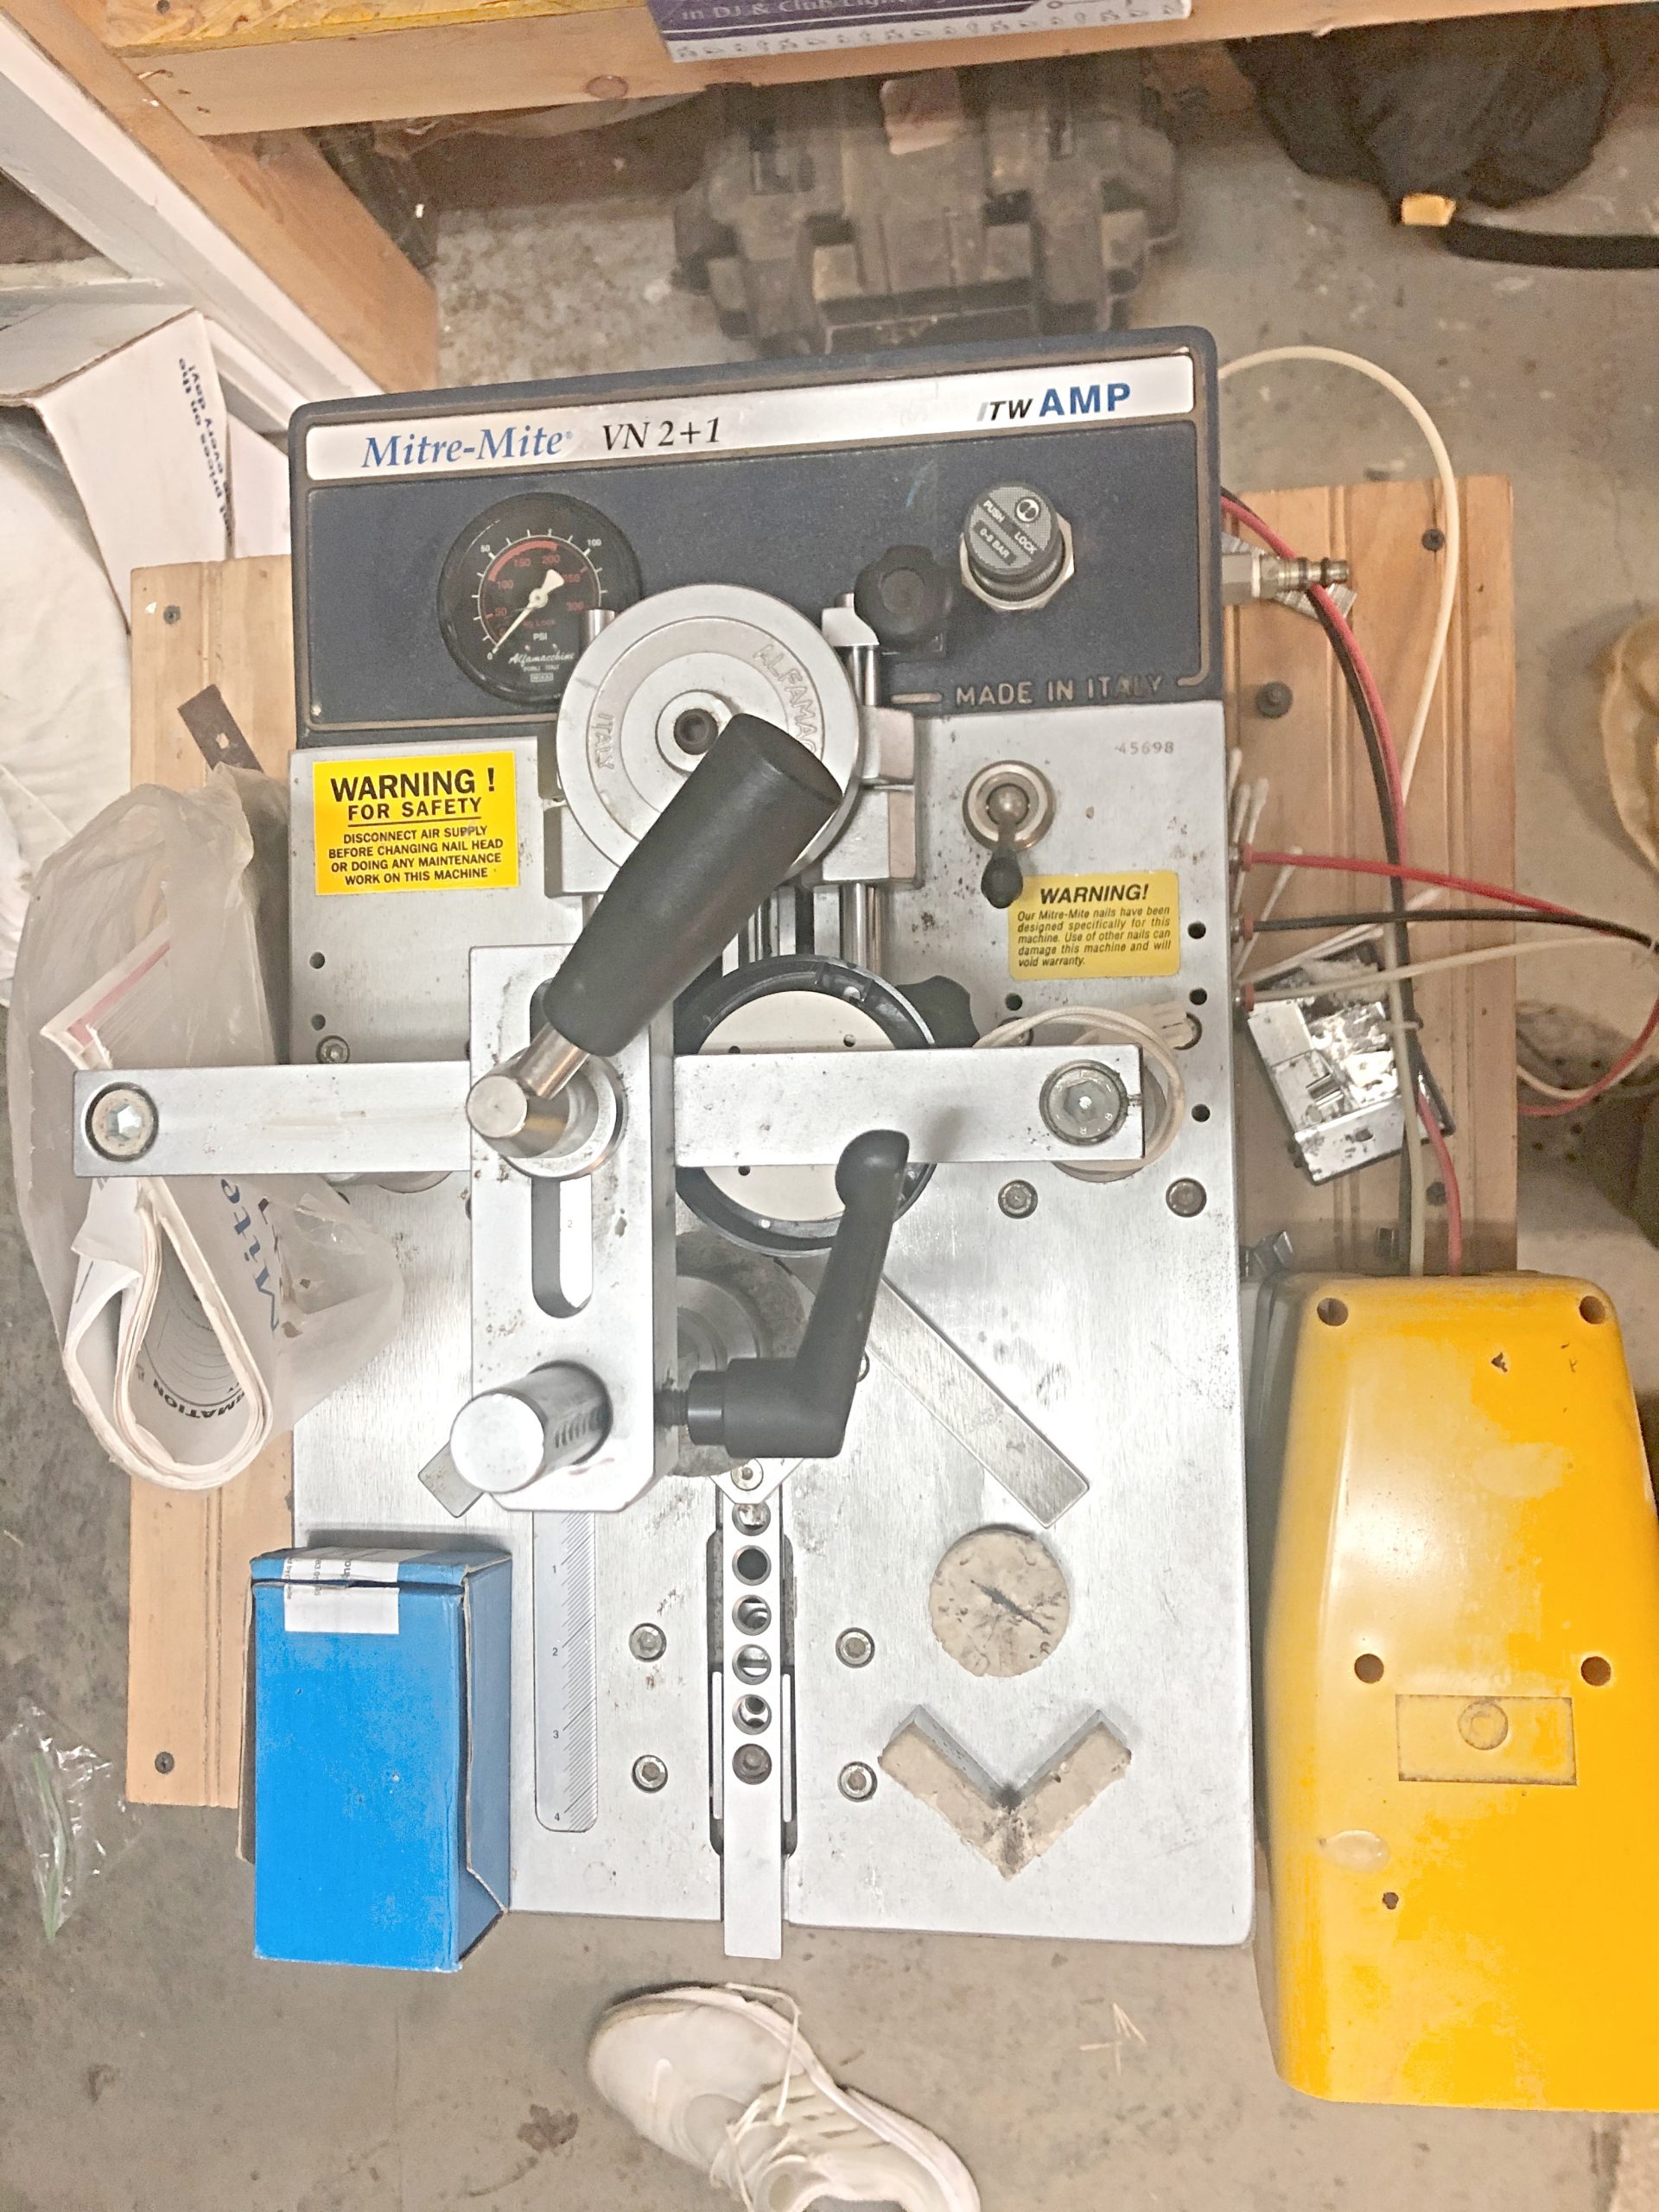 Picture Framing Equipment Lot: Mitre Mite VN2+1 Vnailer, CTD D20 Saw, Fletcher 2100 Cutter & Supplies (used) Item # UE-030521G (Tennessee)